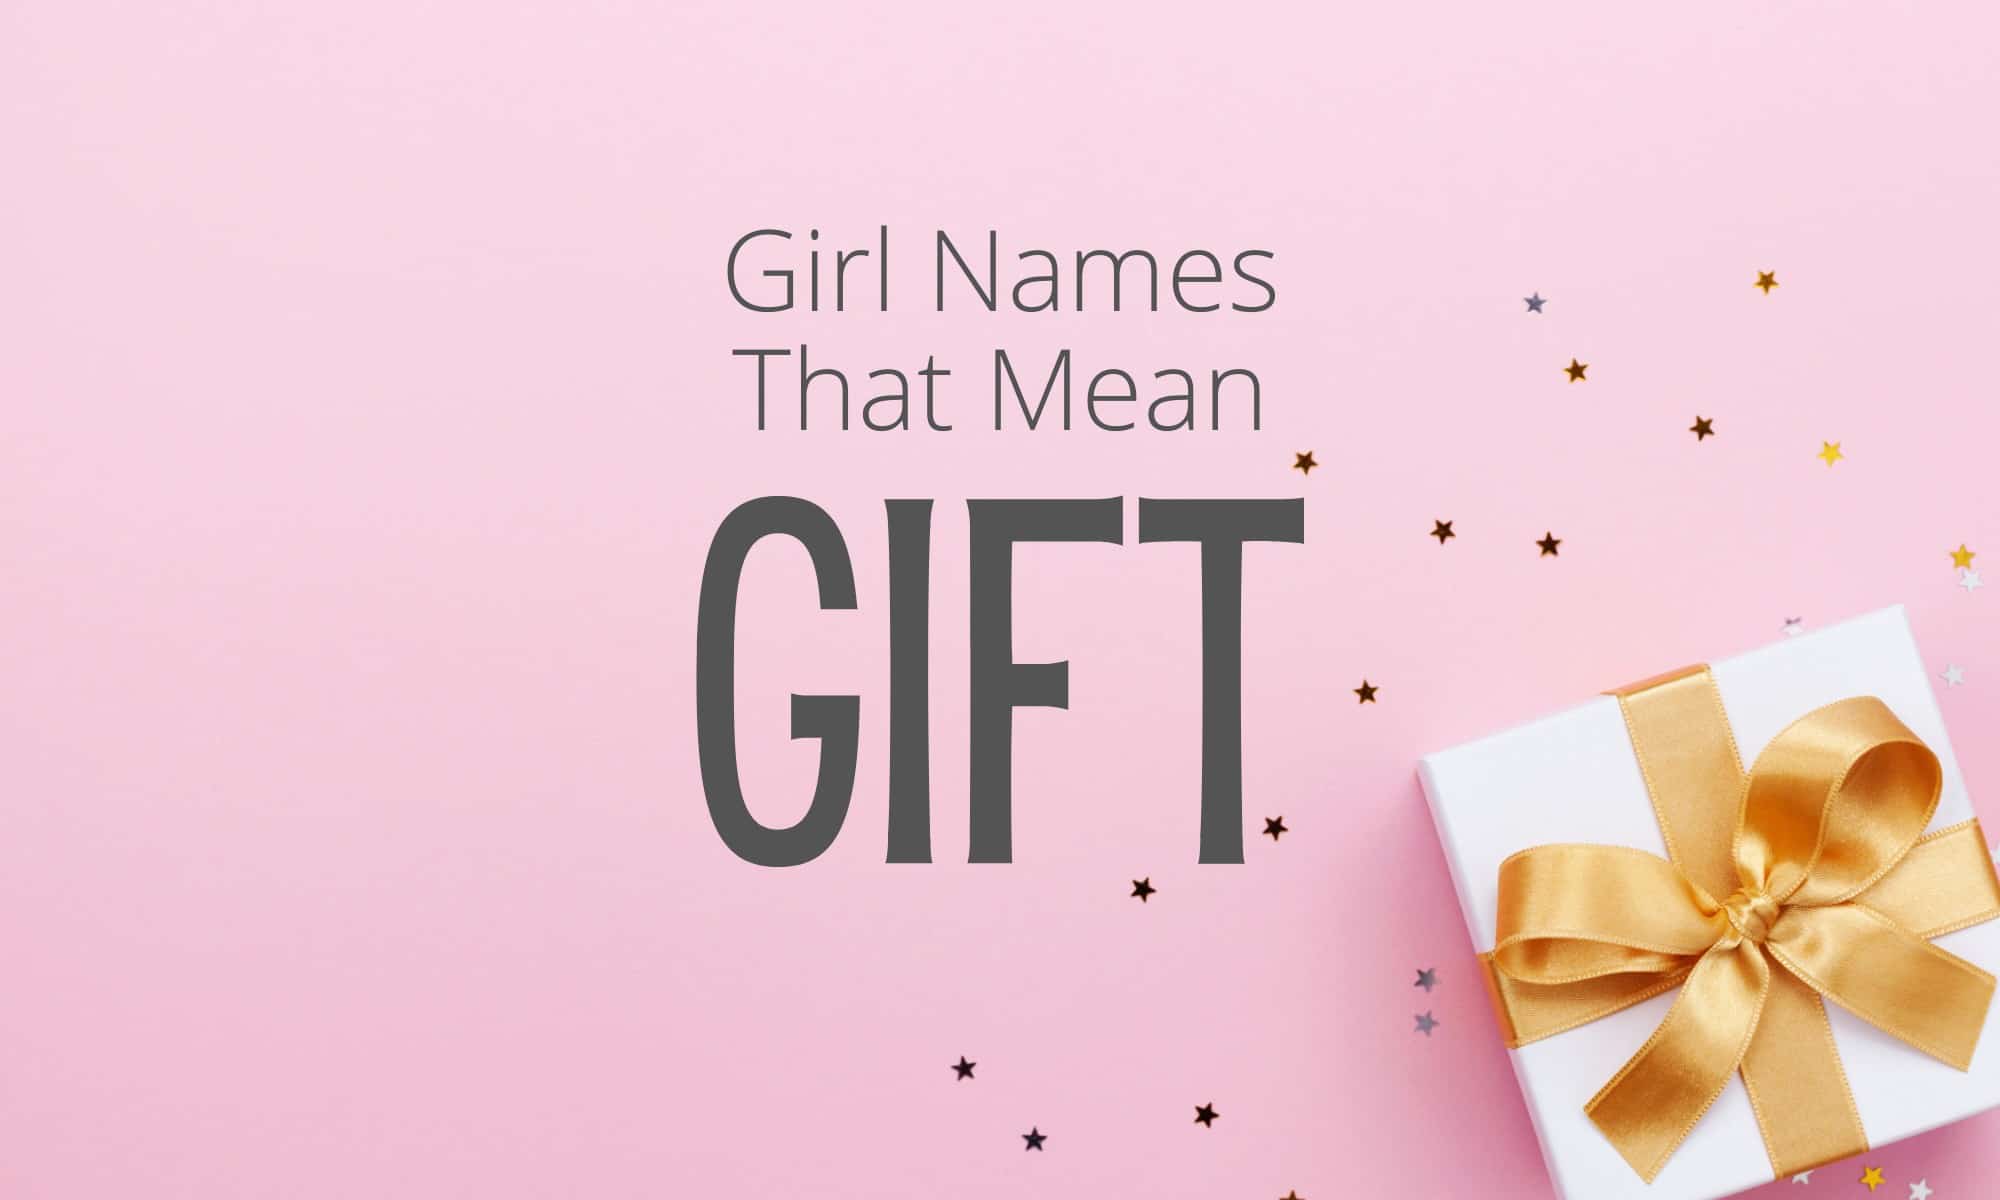 Girl Names That Mean Gift